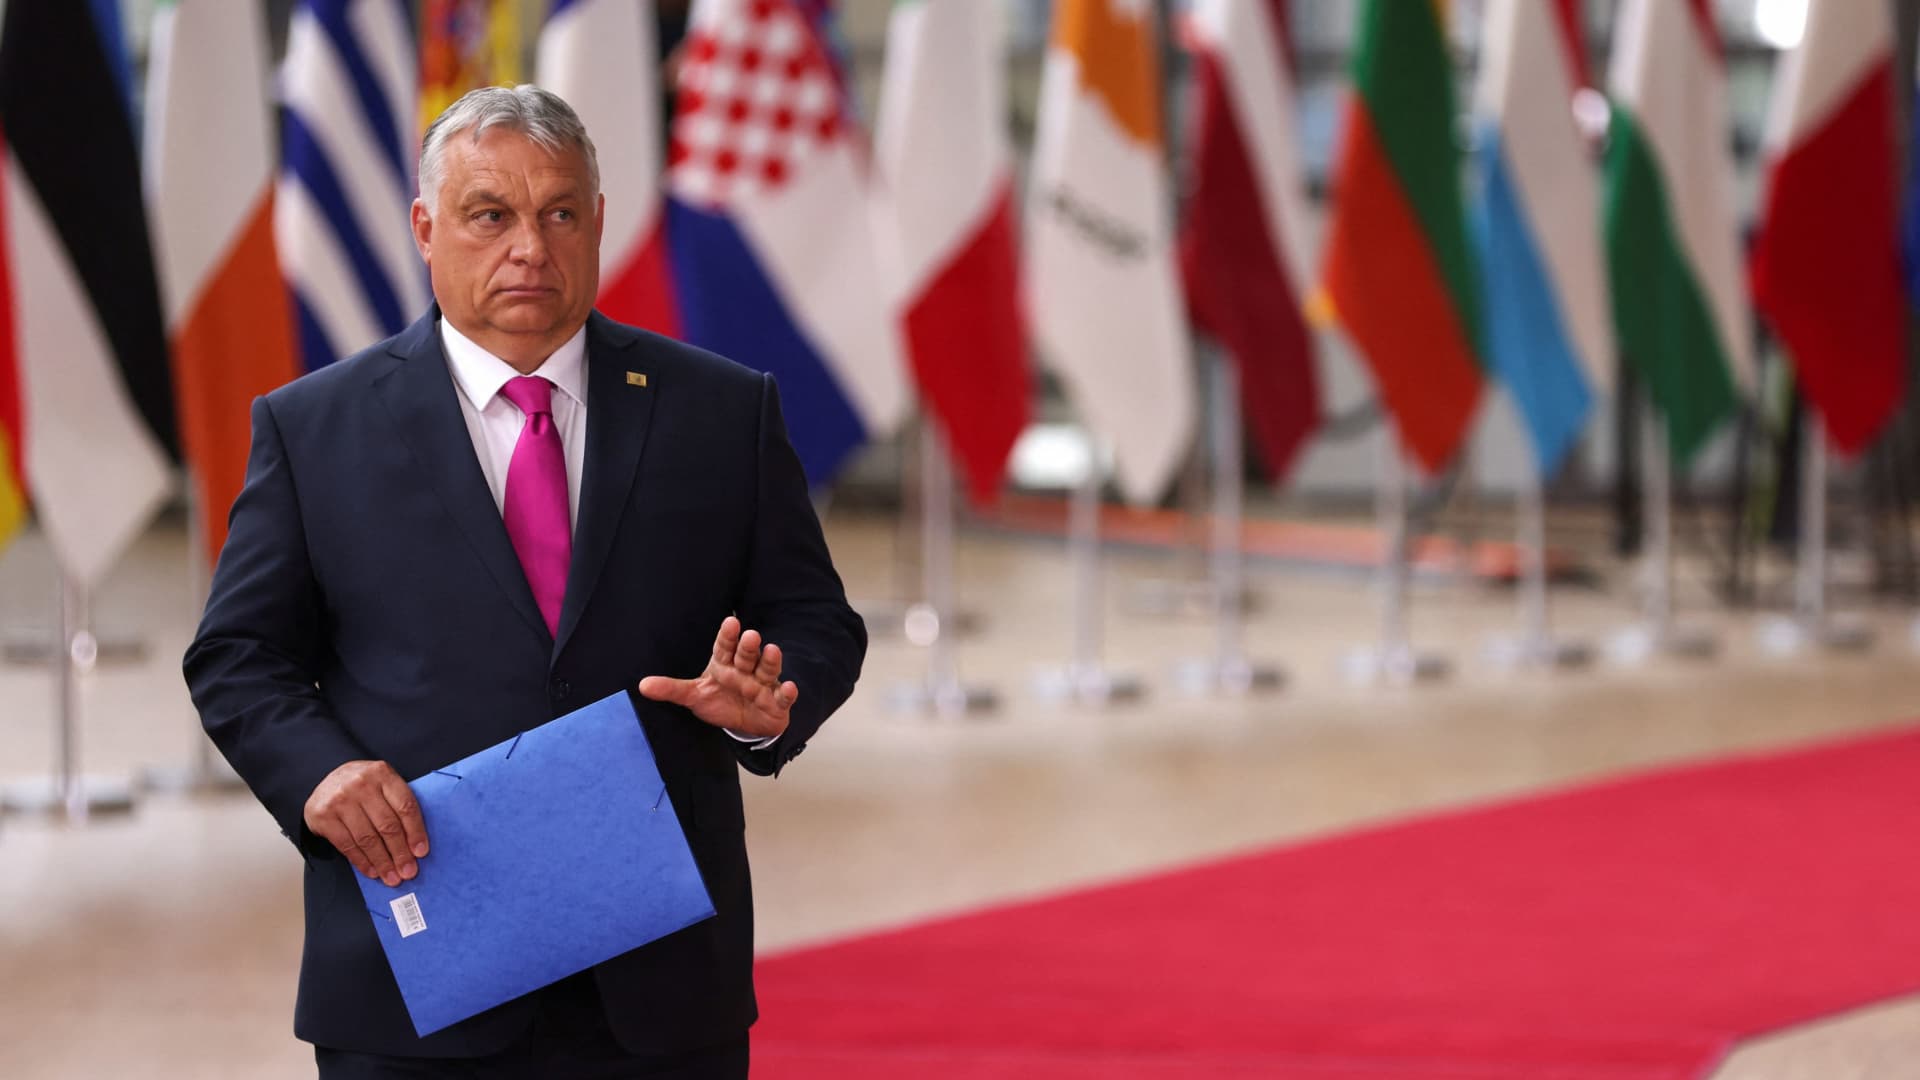 Hungary's Prime Minister Viktor Orban arrives for the European Union leaders summit, as EU's leaders attempt to agree on Russian oil sanctions in response to Russia's invasion of Ukraine, in Brussels, Belgium May 30, 2022. 